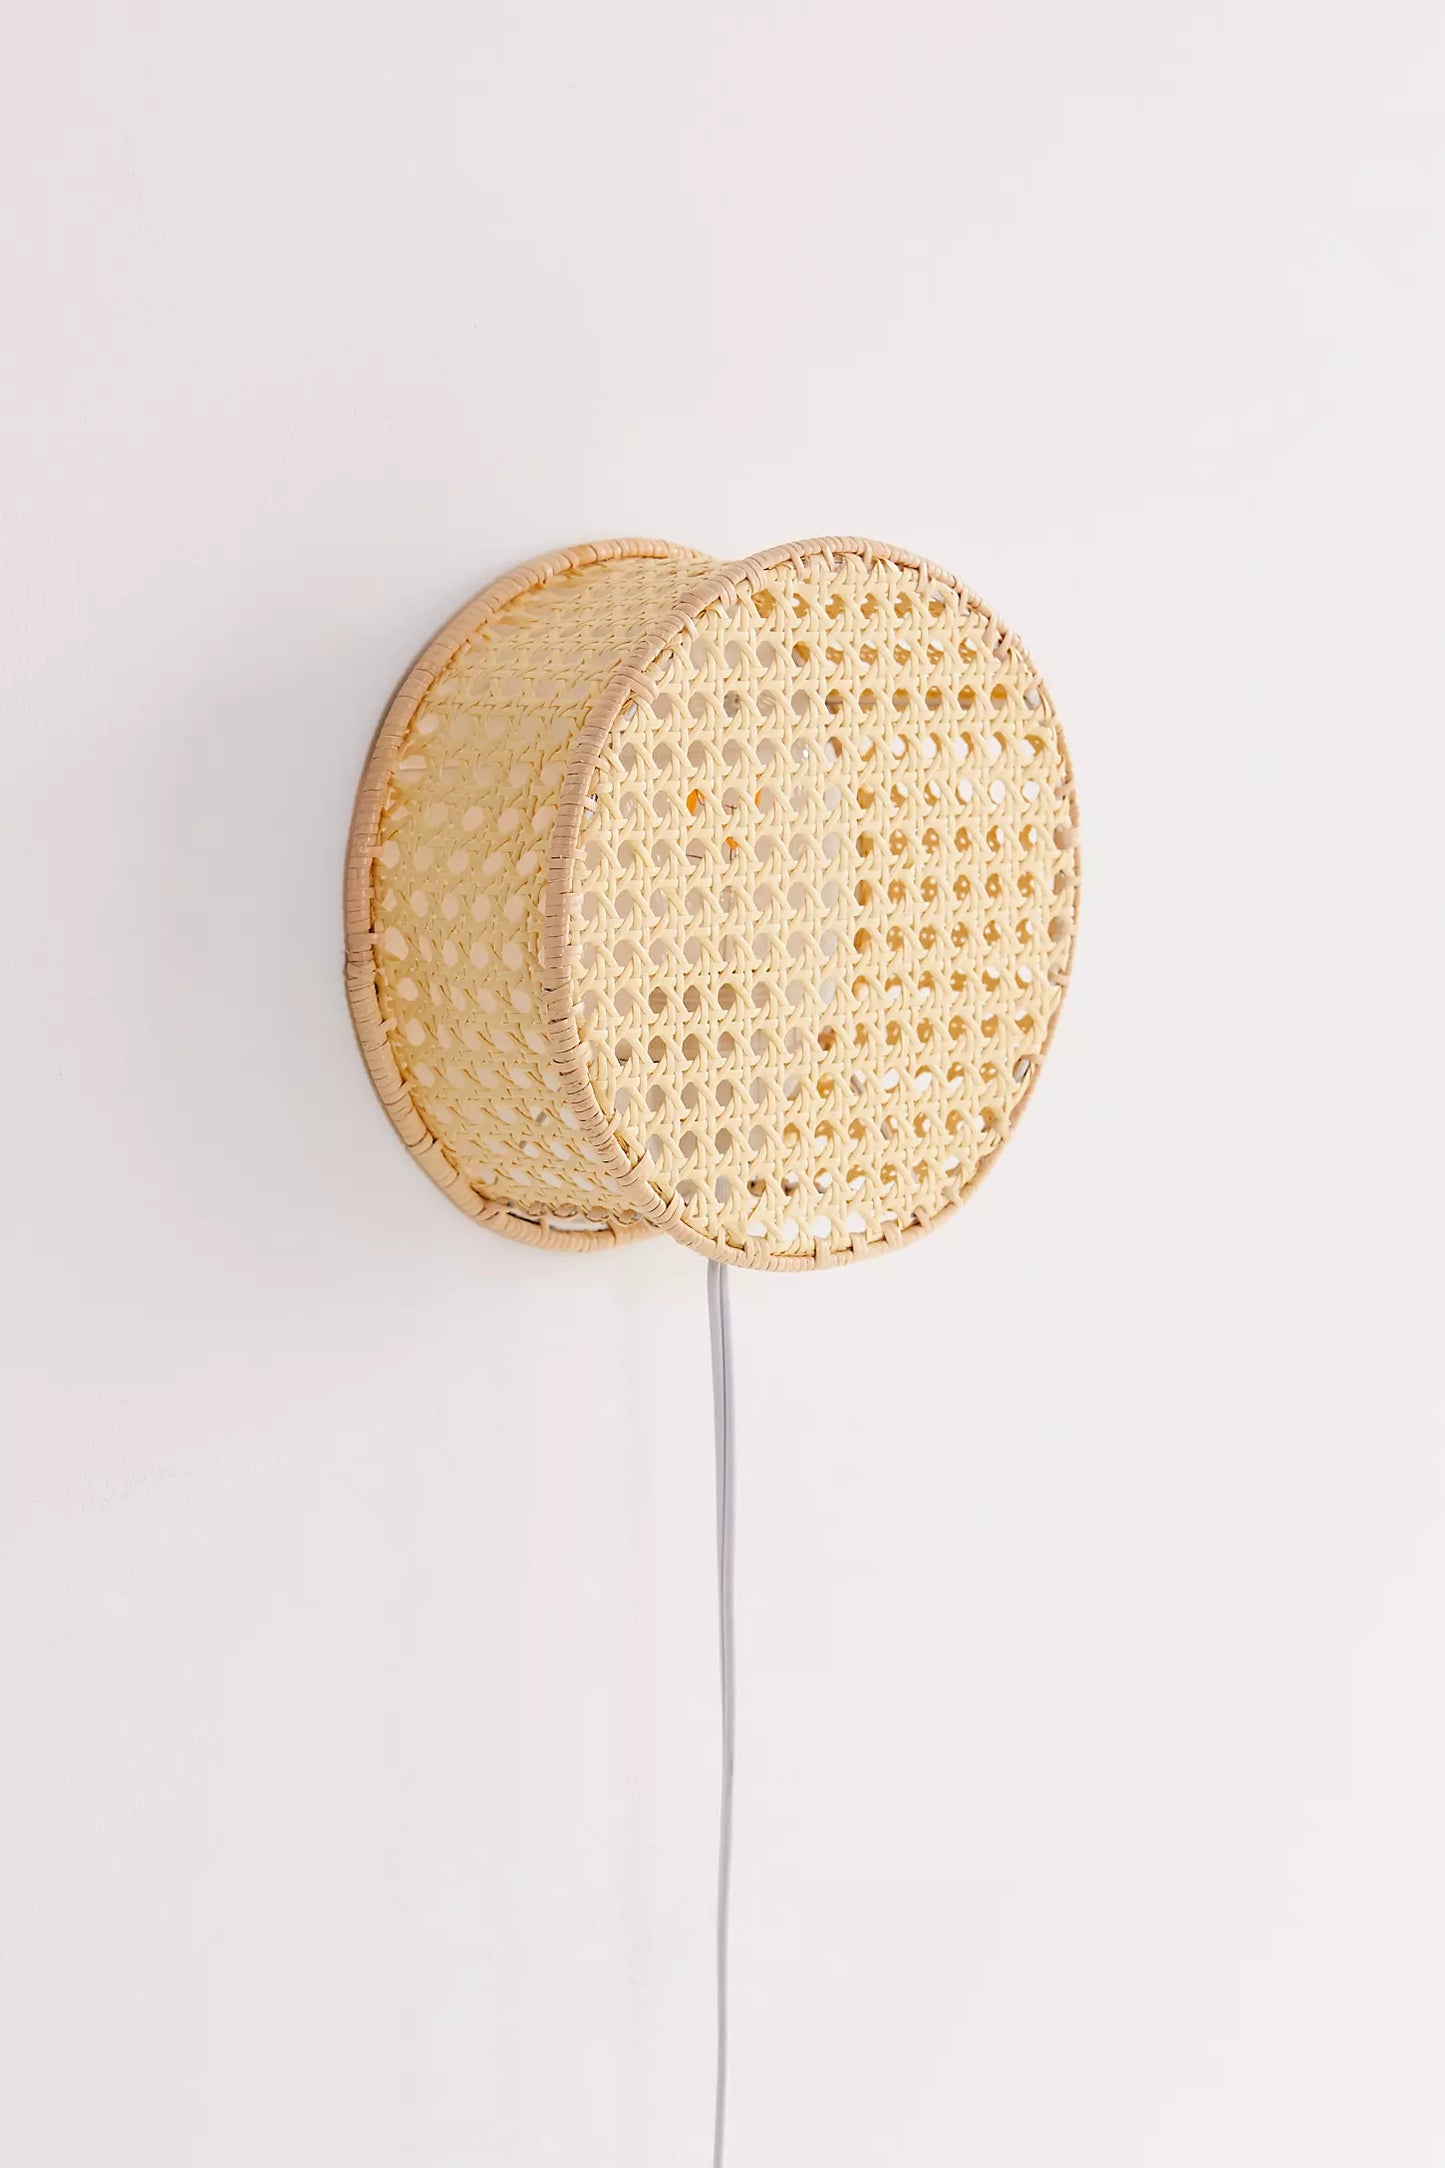 Bamboo Wall lamps For Living Room | Rattan Wall scones | Wicker Wall Lamps | Cane Wall Lamps - Adah - Akway